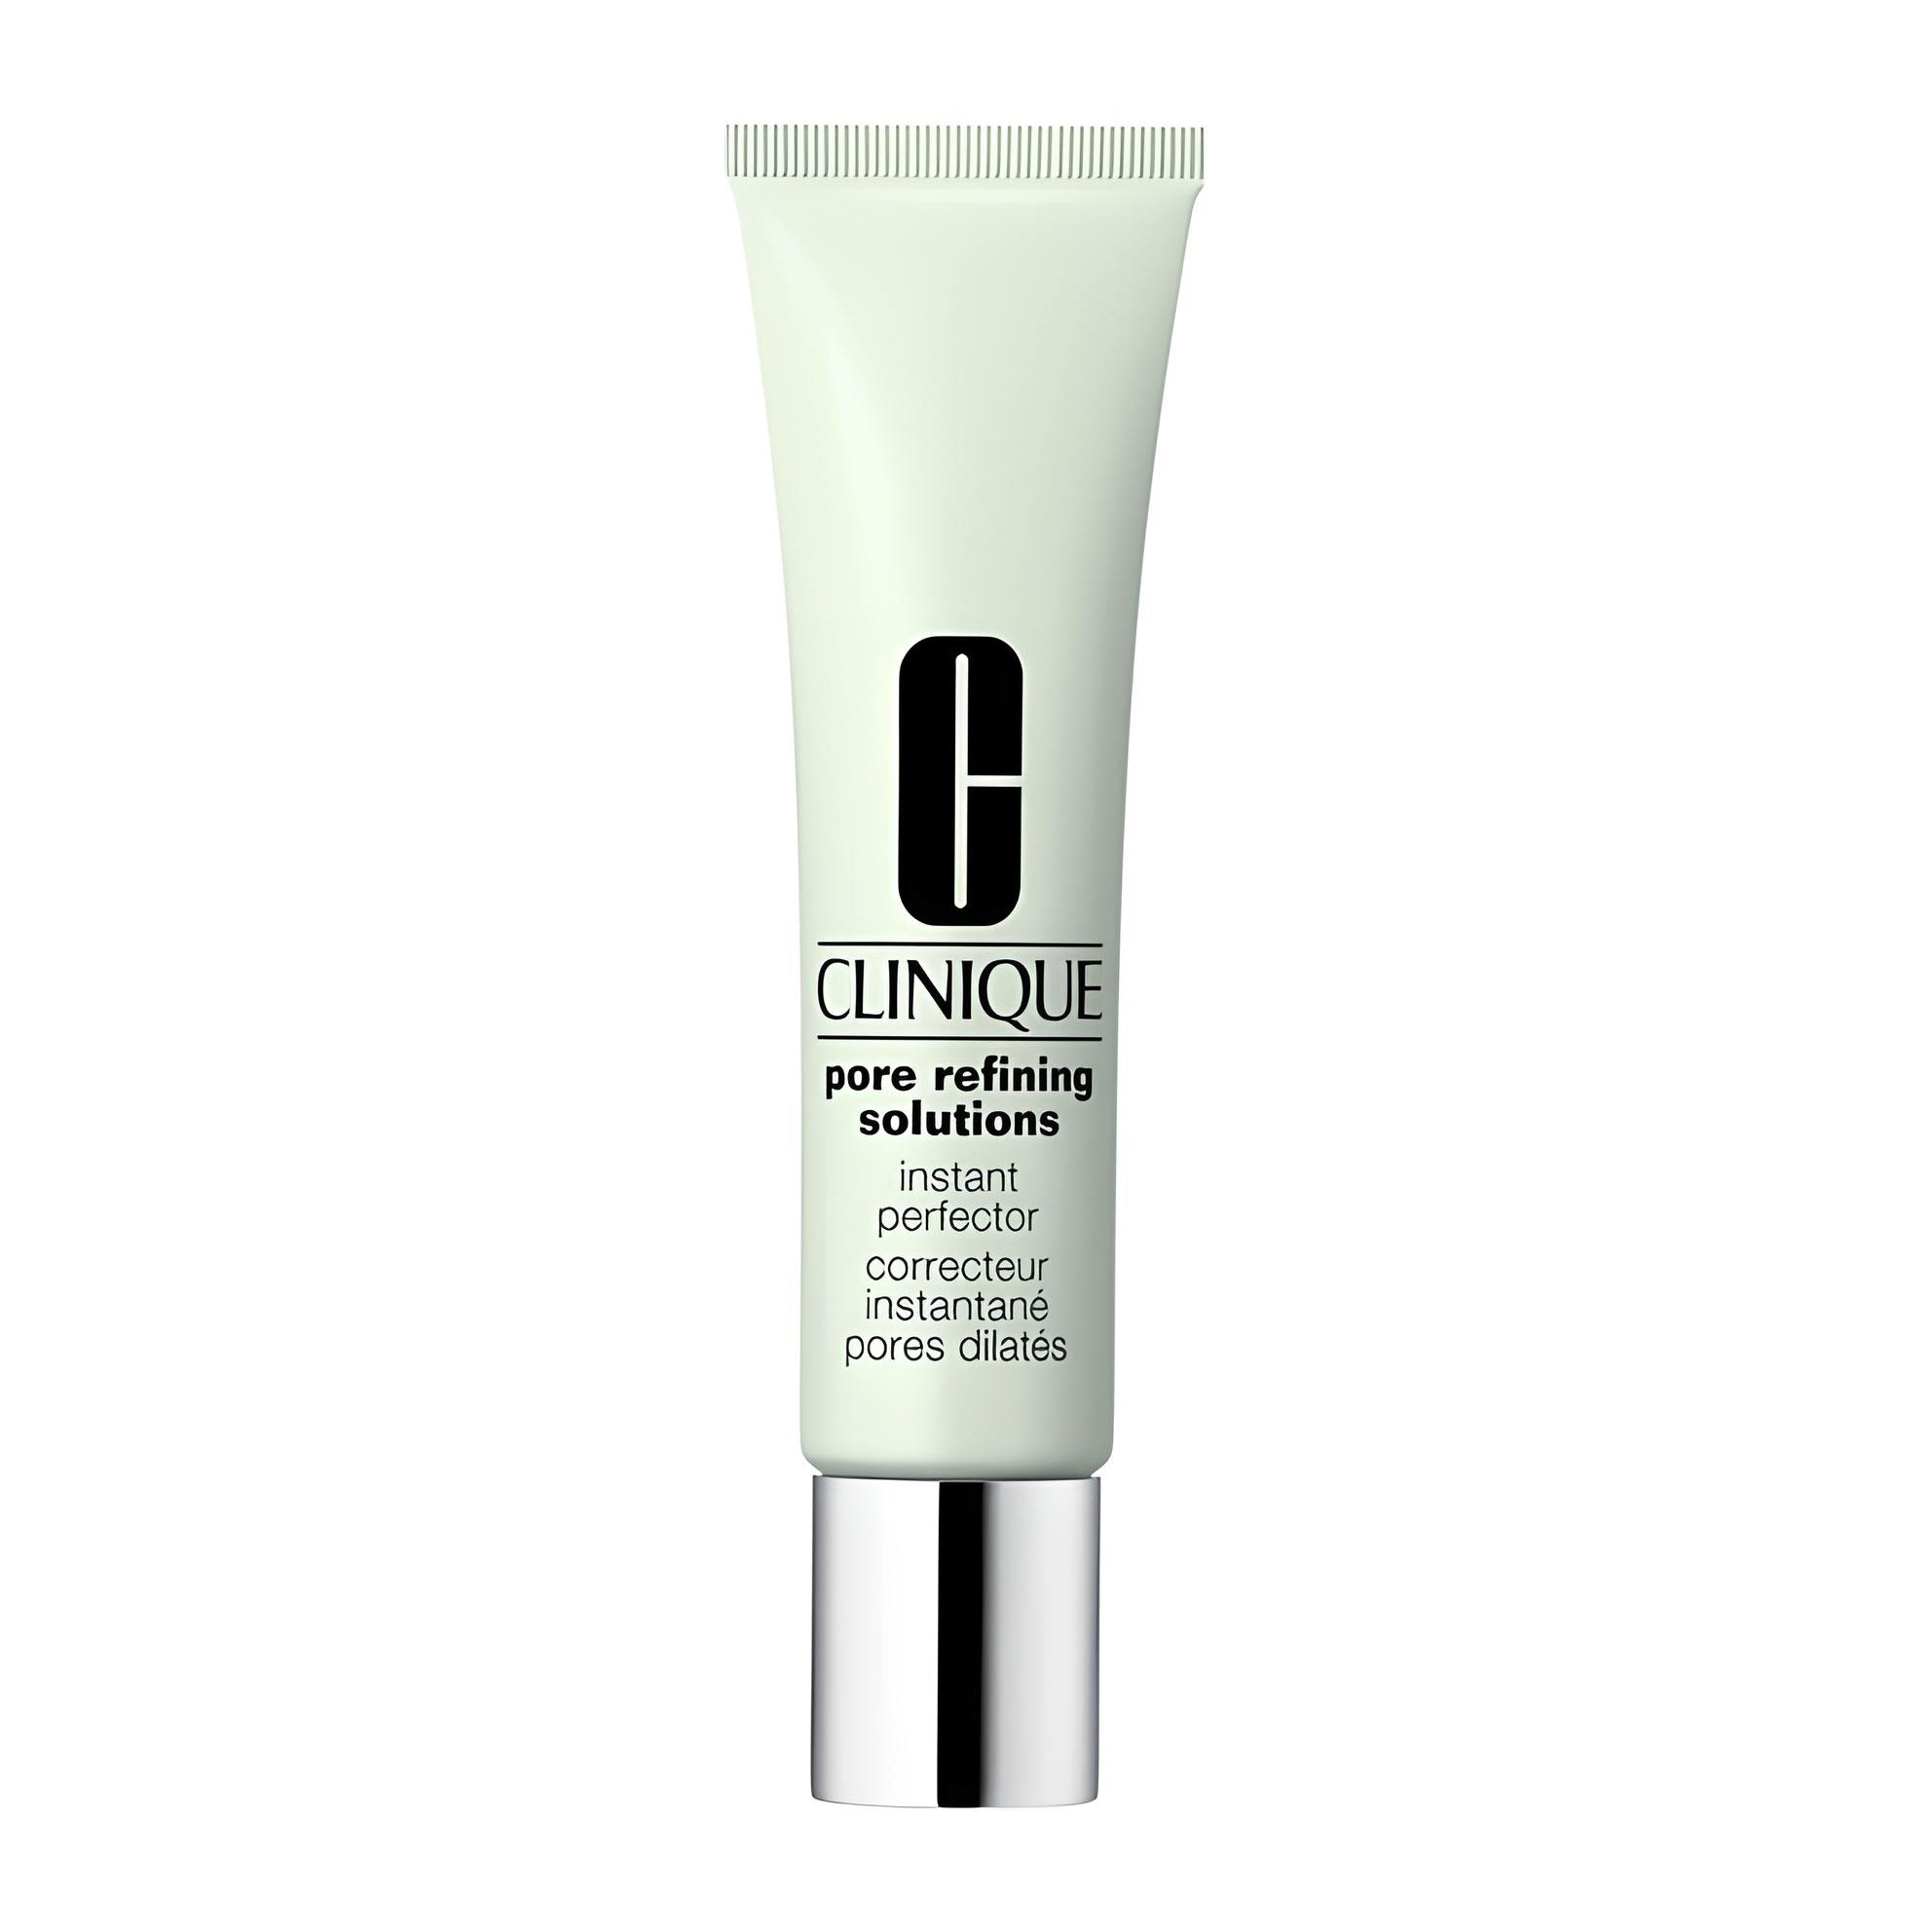 PORE REFINING SOLUTIONS instant perfector #03-inv brig Gesichtspflege CLINIQUE   